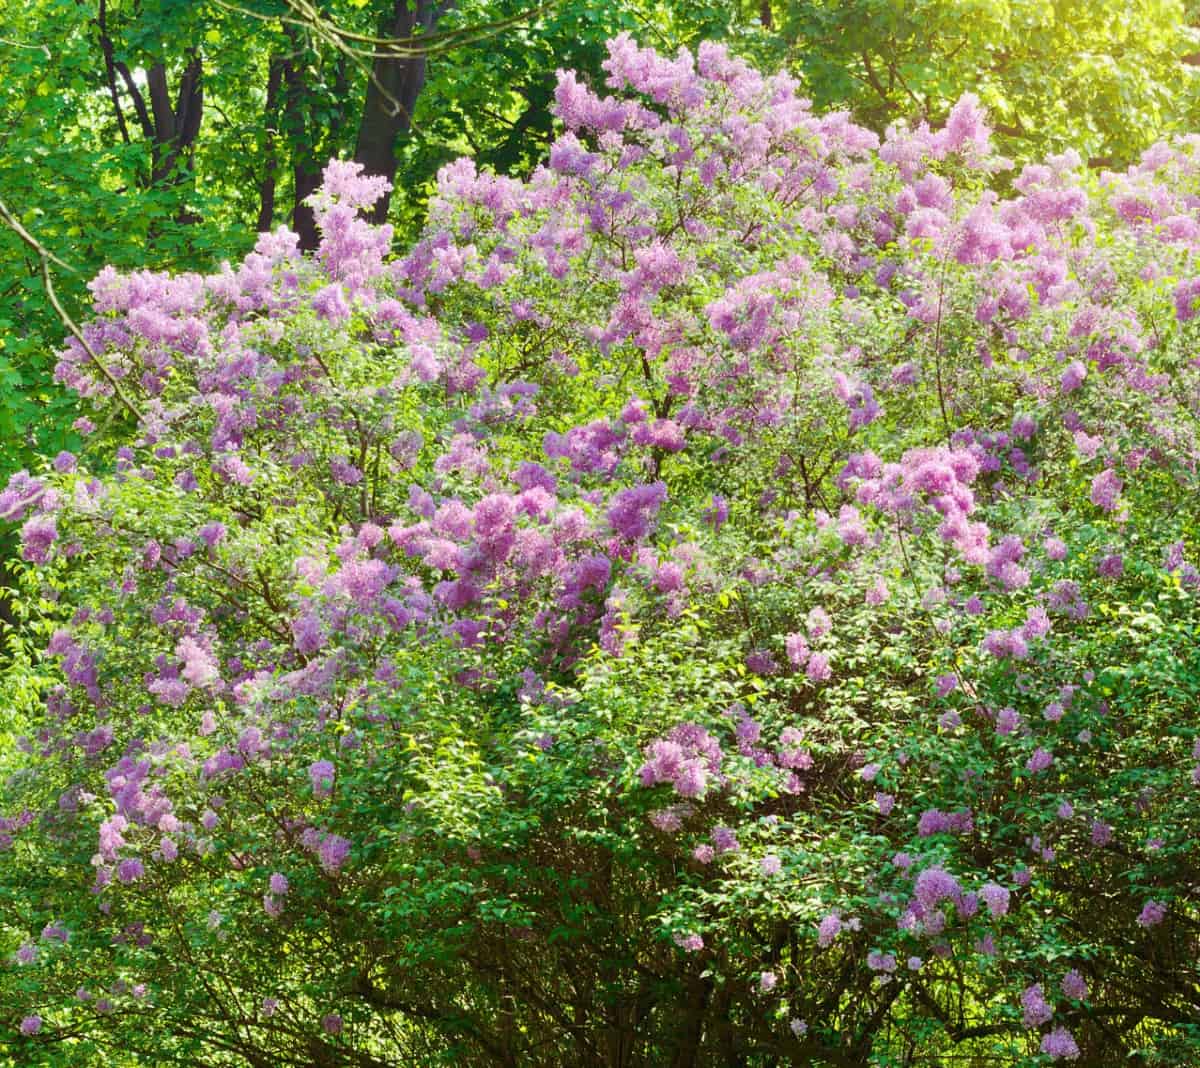 Lilacs have sweet-smelling flowers.